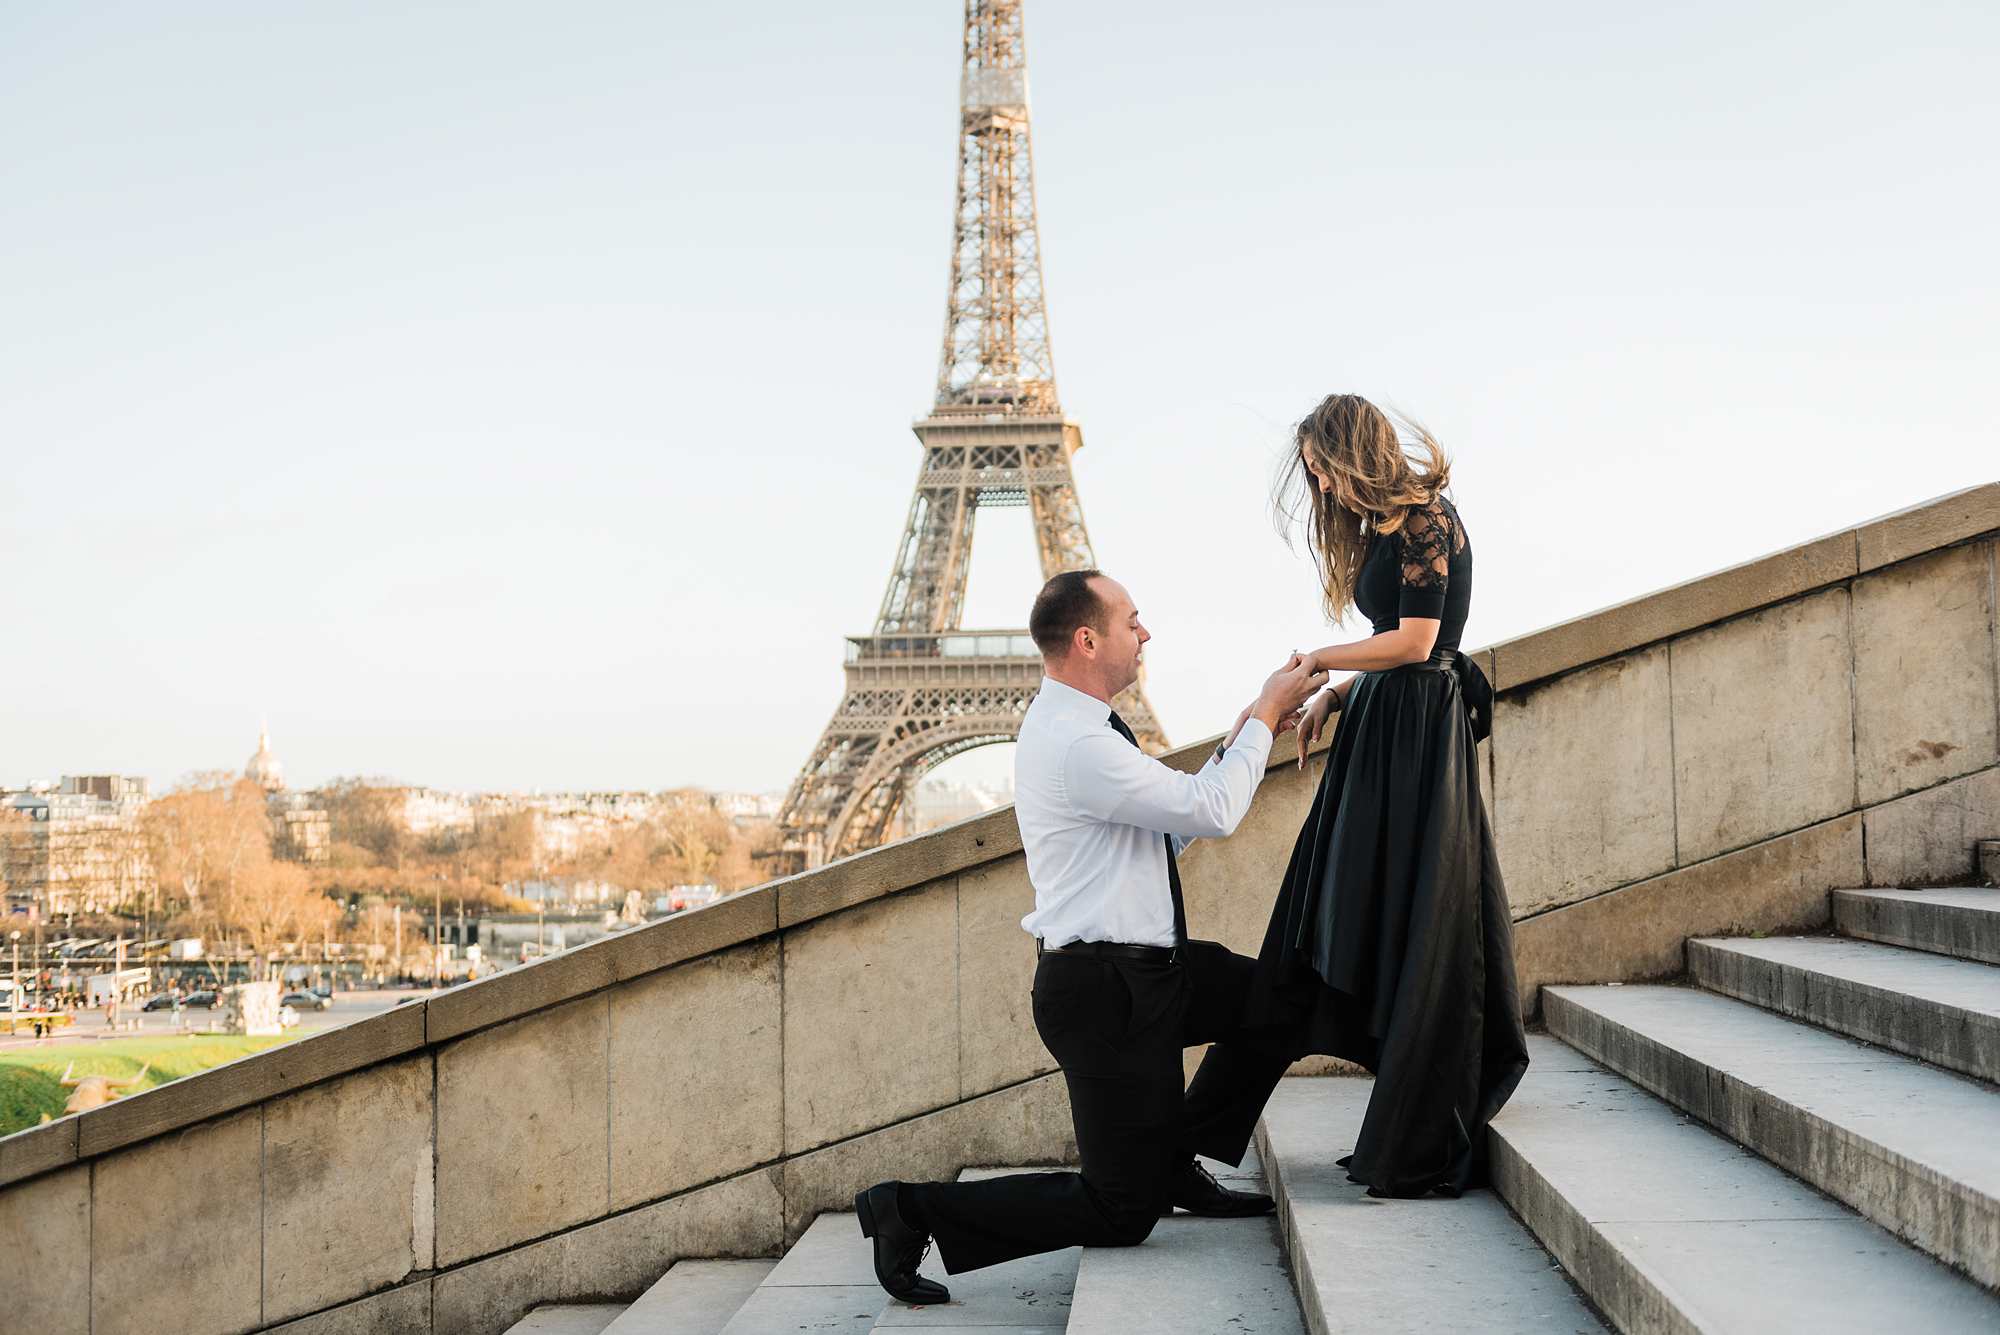 Jennifer and Yannick's Surprise Paris Proposal Photo Shoot at the Eiffel Tower - sliding the ring onto her finger